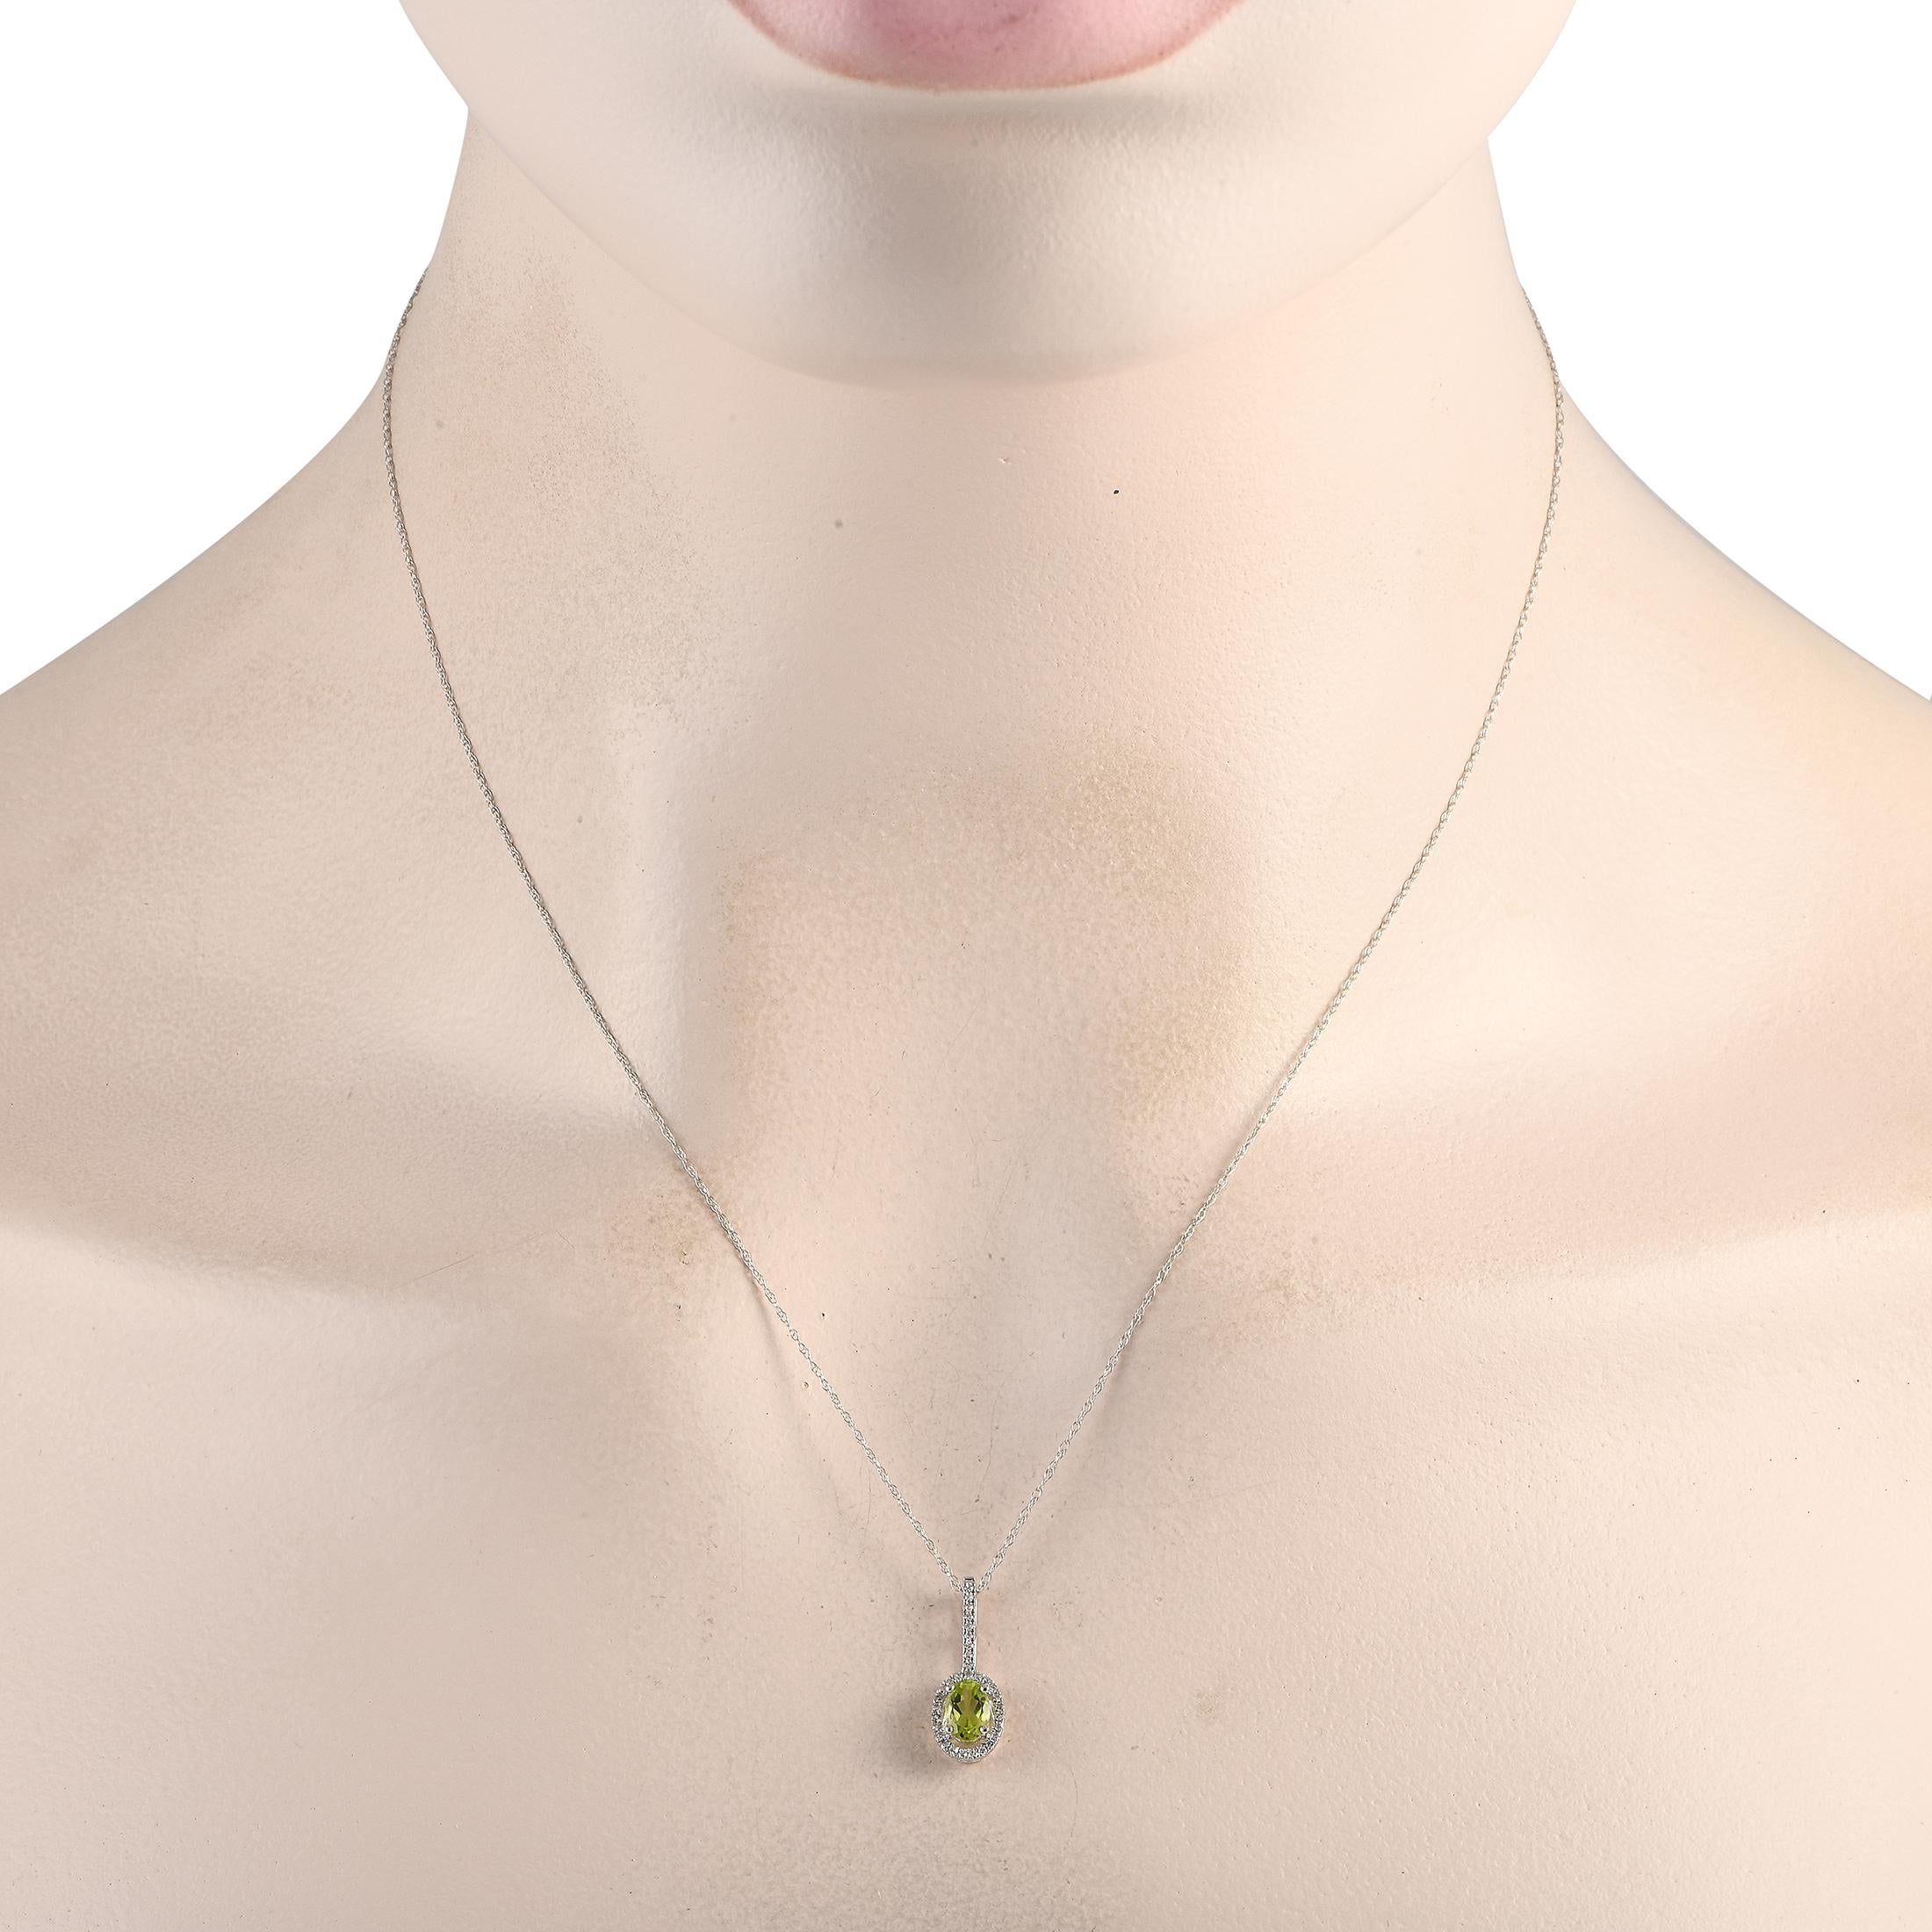 This simple, elegant necklace is ideal for anyone with a minimalist aesthetic. Suspended from an 18 chain, youll find a 14K White Gold pendant measuring 0.75 long by 0.25 wide. It comes complete with a sparkling green Peridot center stone and